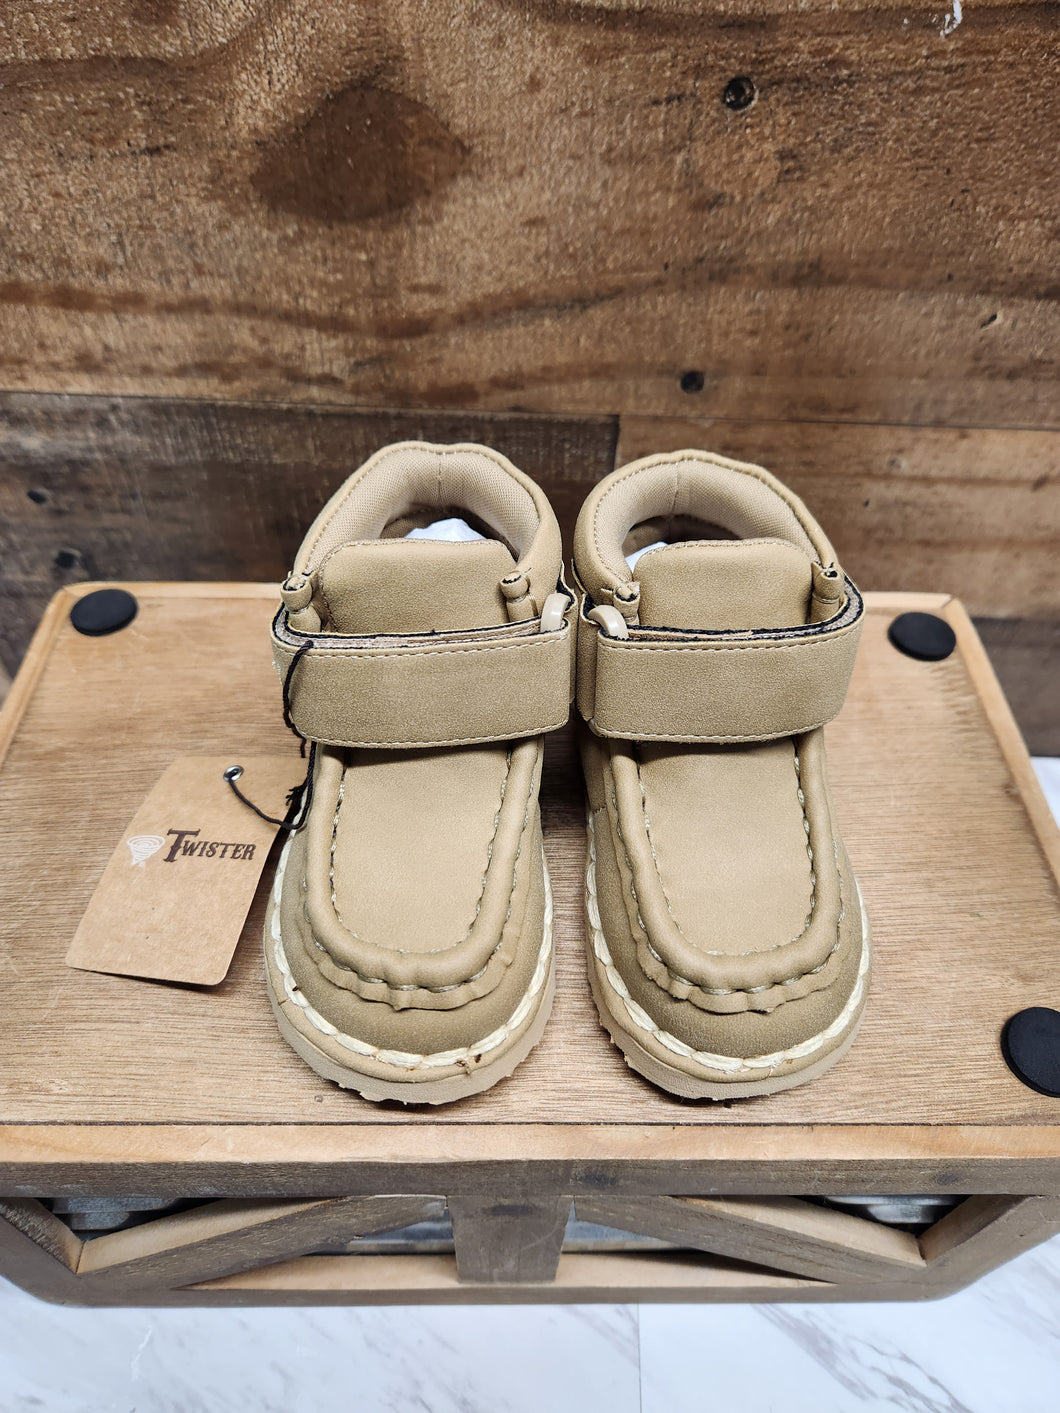 Twister Toddler Shoes - Brycen